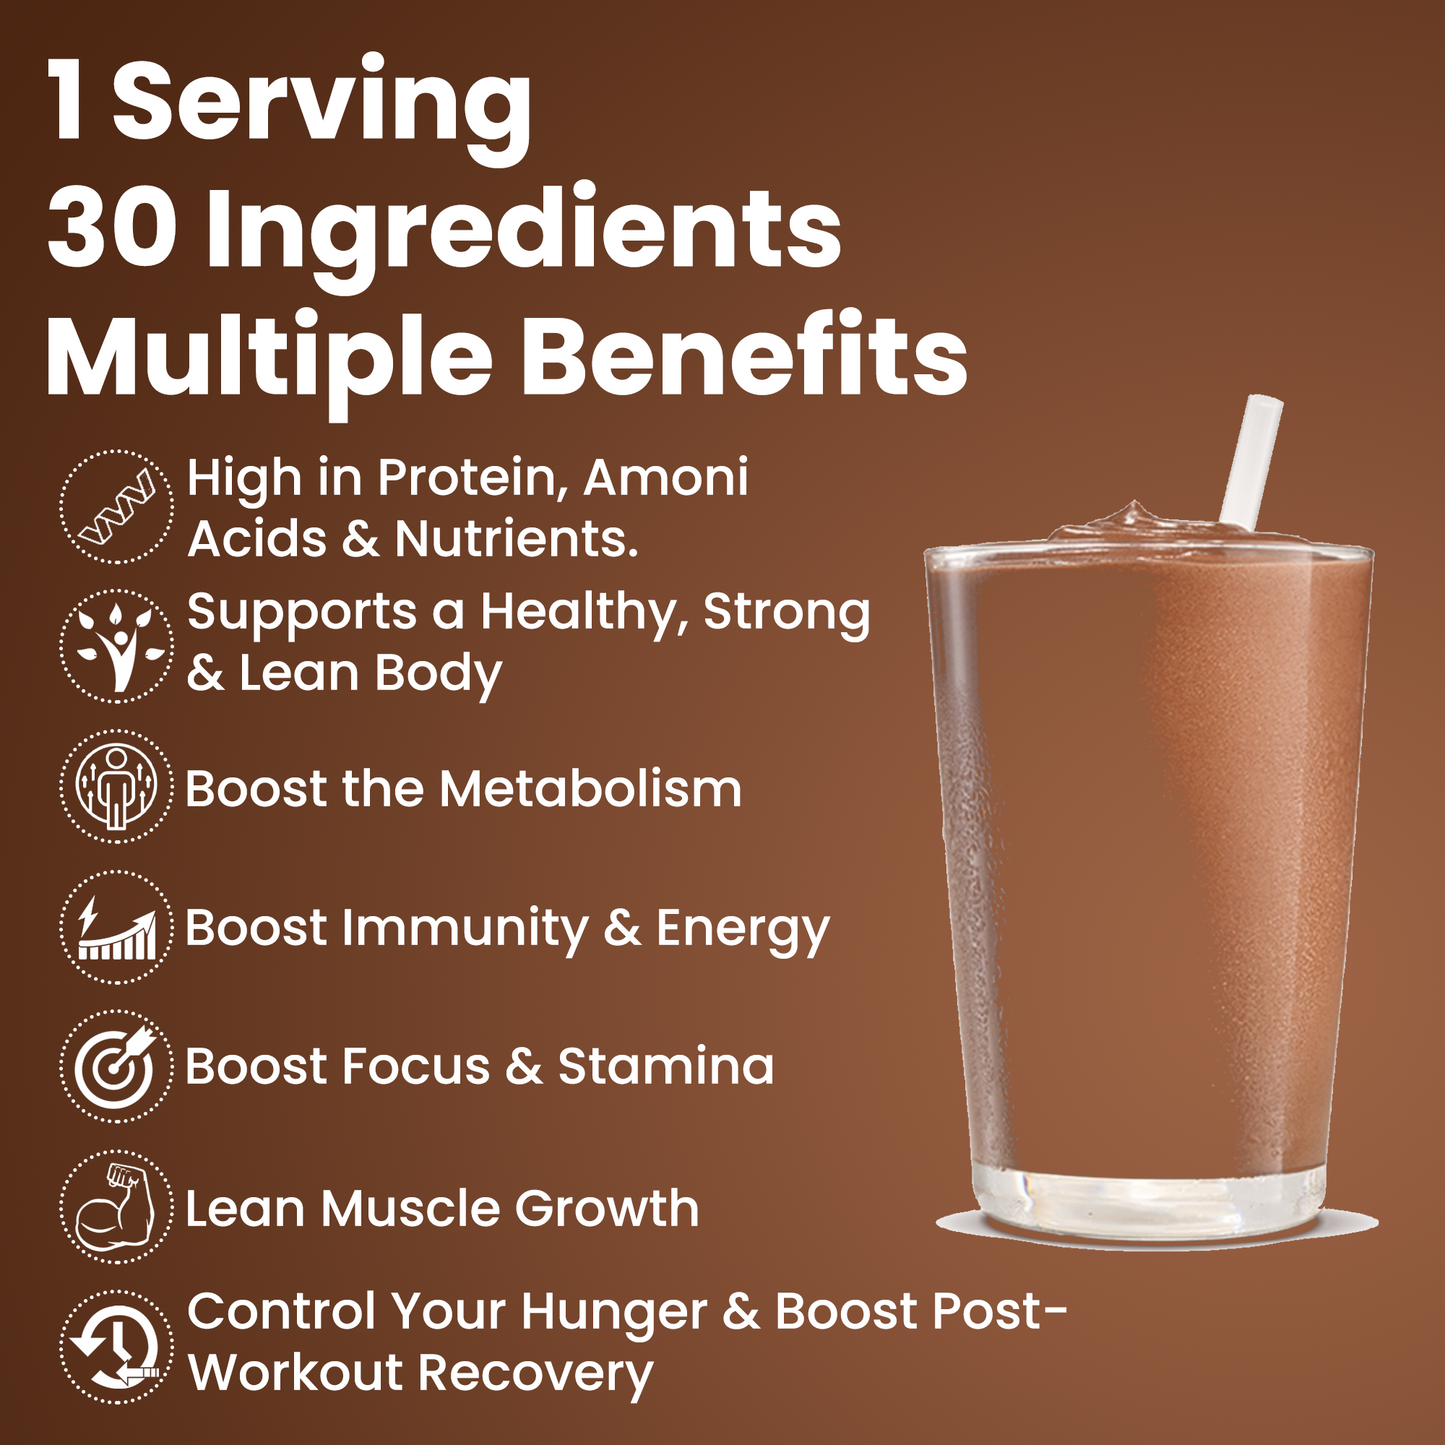 Maca Power Protein -  Natural Plant Based Protein